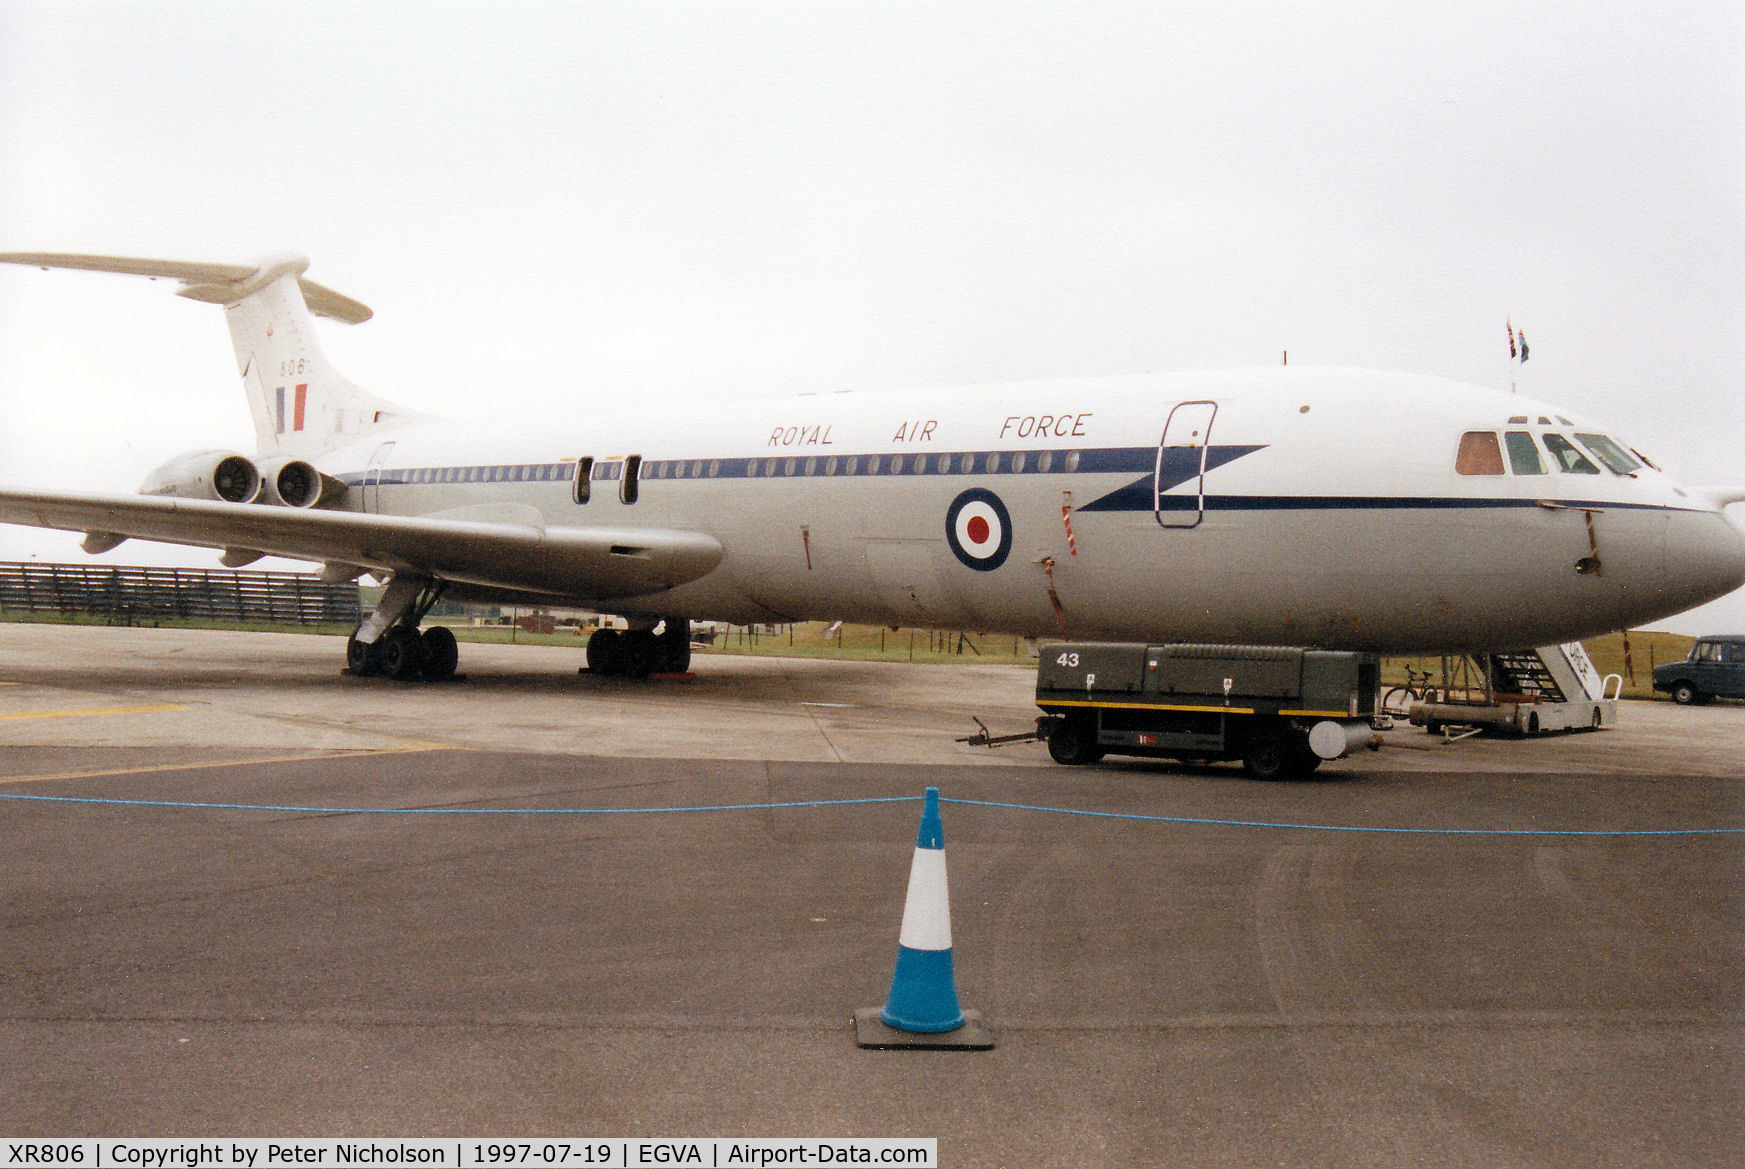 XR806, 1967 Vickers VC10 C.1K C/N 826, VC-10 C.1K, named George Thompson VC, callsign Ascot 855 of RAF Brize Norton's 10 Squadron on display at the 1997 Intnl Air Tattoo at RAF Fairford.